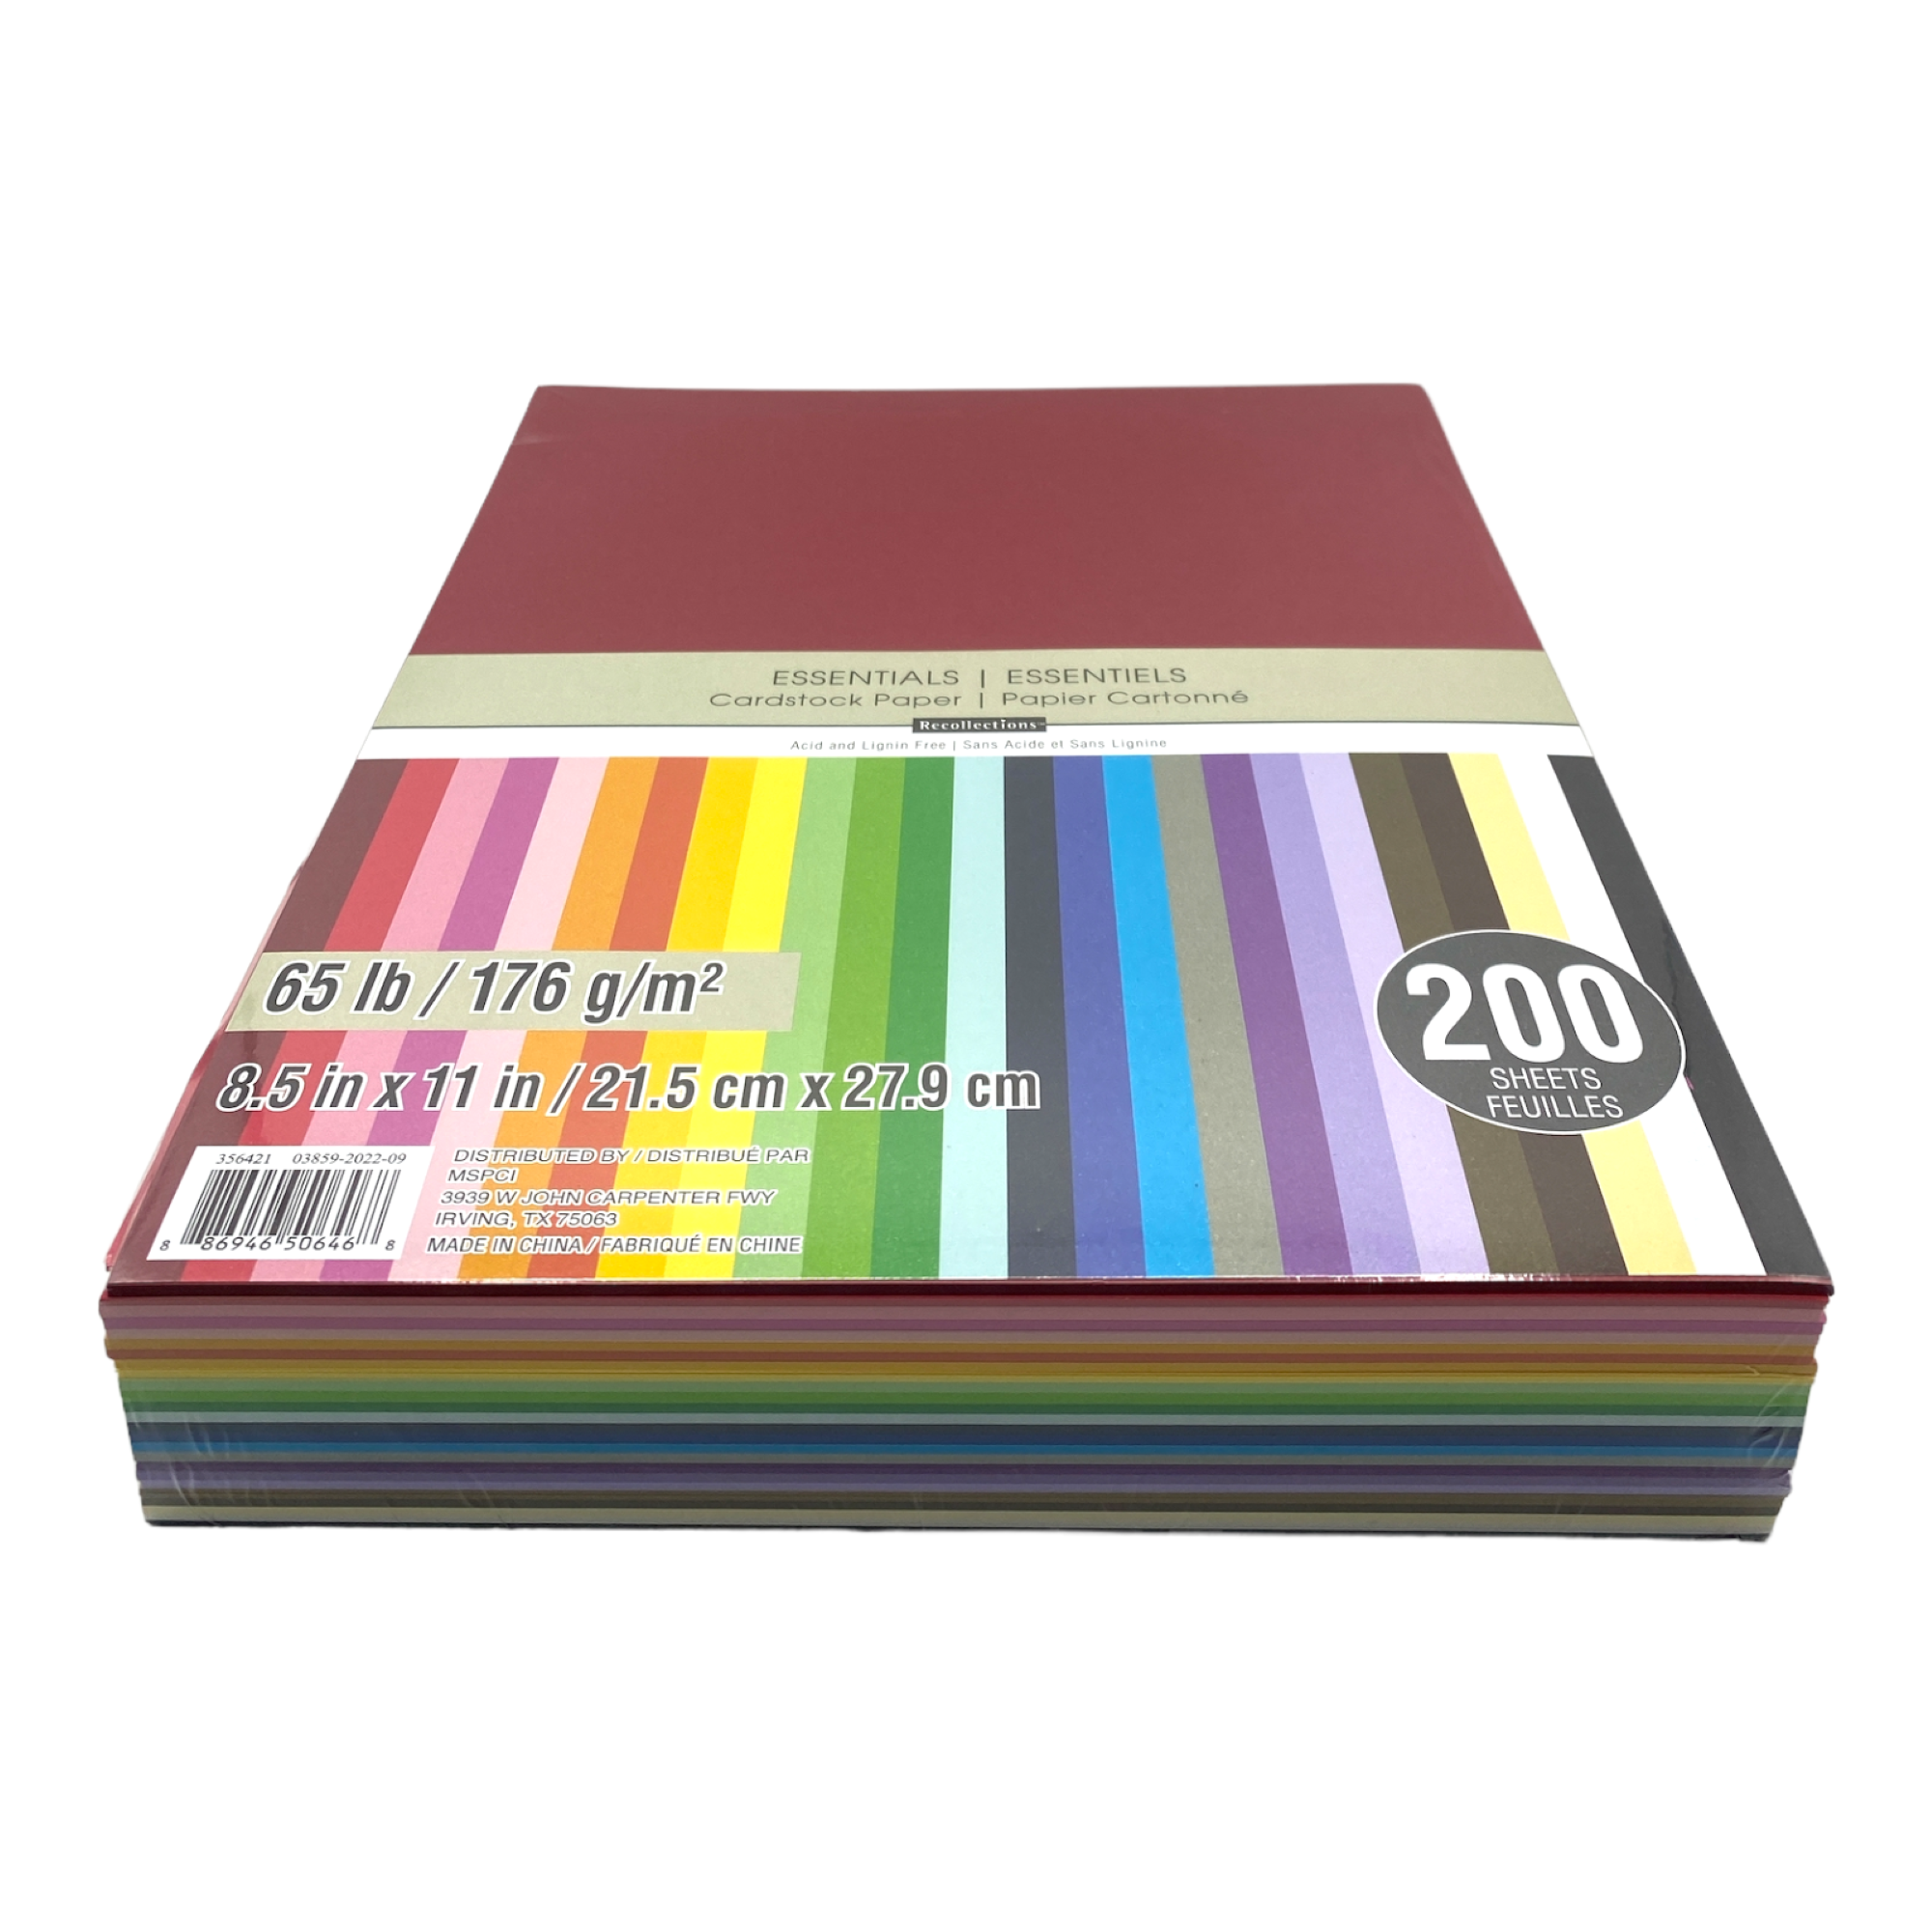 9 Packs: 200 ct. (1,800 total) Essentials 8.5 x 11 Cardstock Paper by  Recollections™